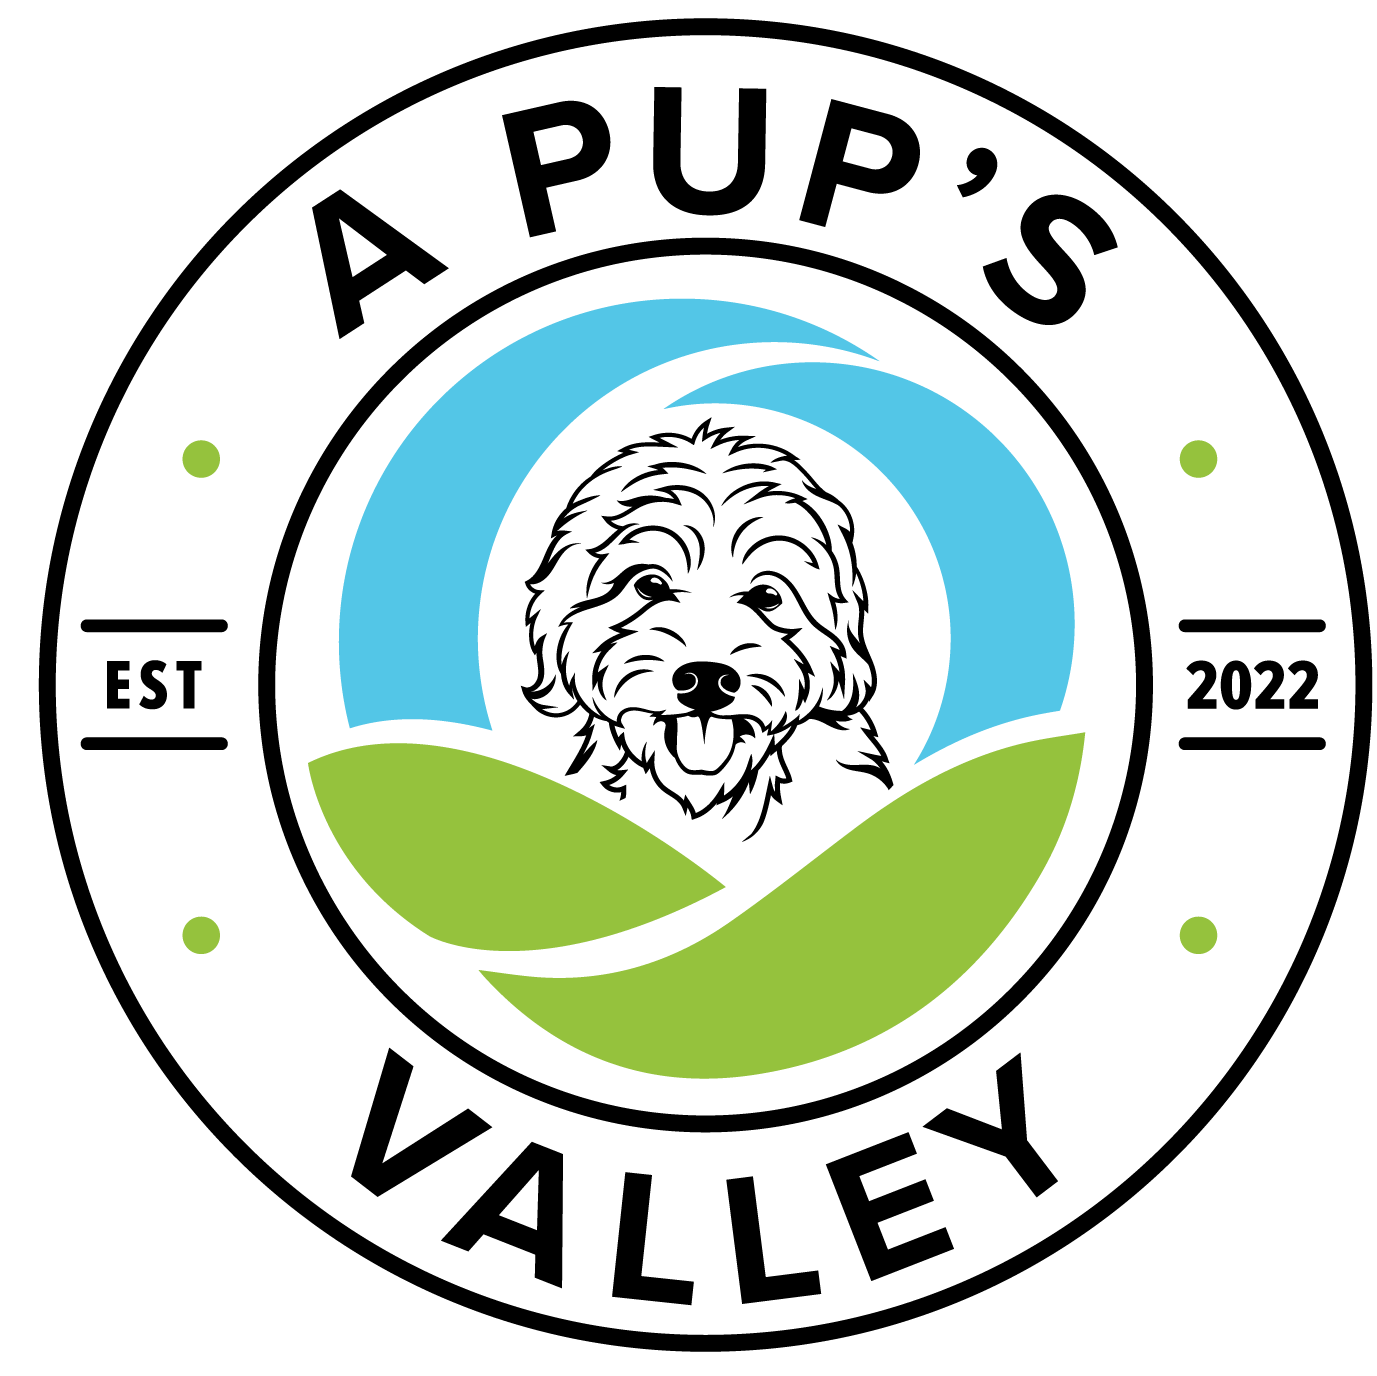 A Pup's Valley blue and green logo